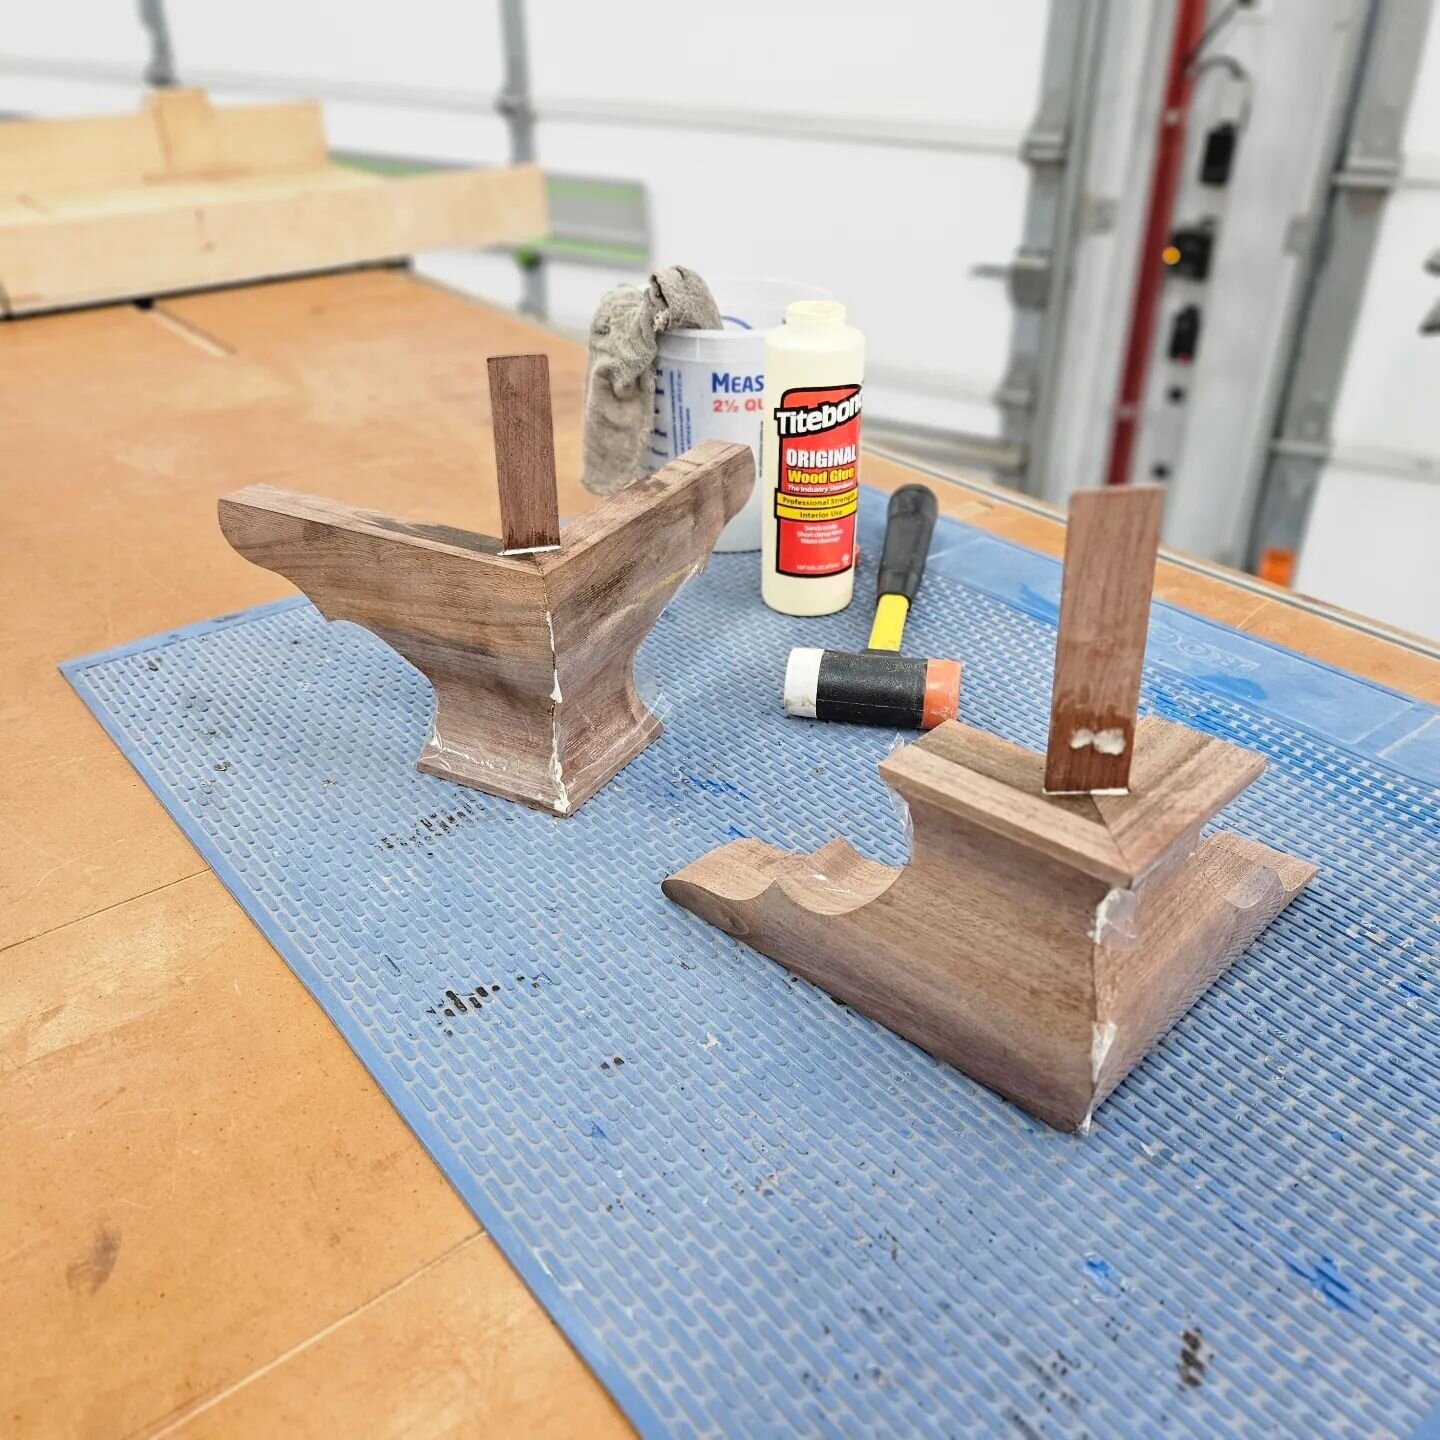 It's a pretty stress free glue-up. Adding splines really helped lock everything together. These are rock solid. 
#finewoodworking #ogeebracketfeet #bracketfeet #periodfurniture #finefurniture #chinacabinet #furnituremaker #woodworker #woodworking #hu